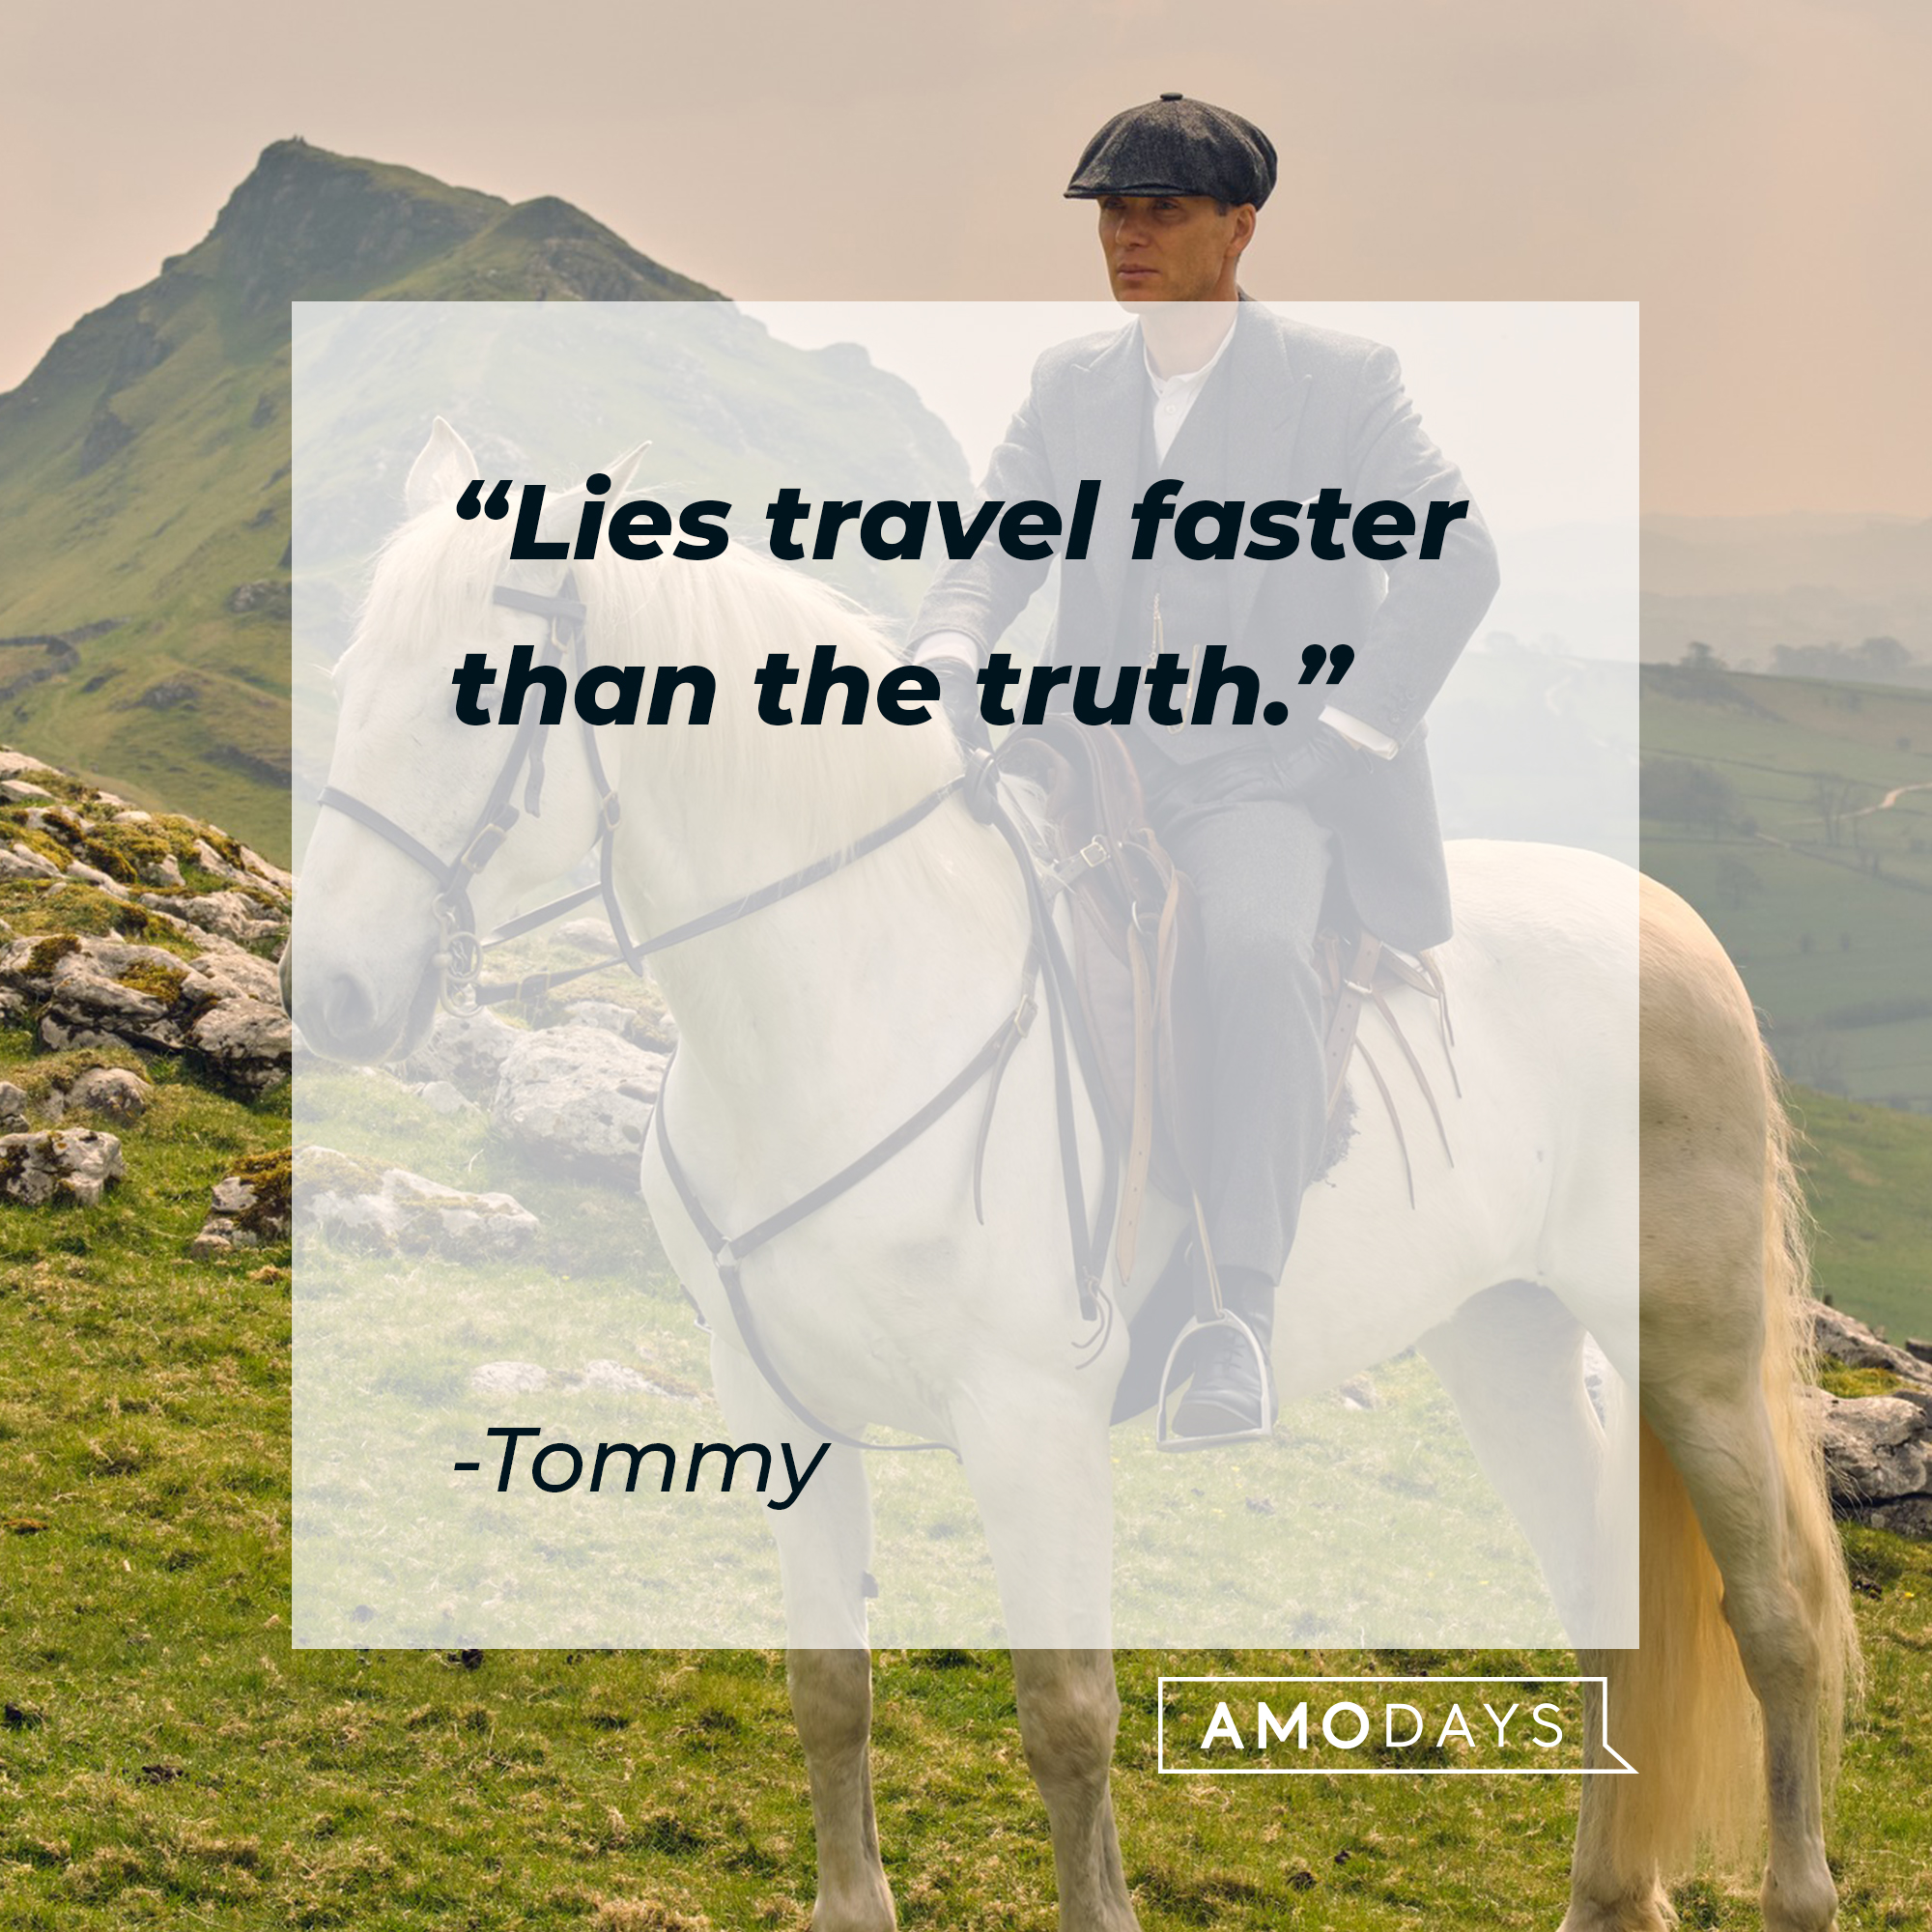 Tommy's quote: Lies travel faster than the truth." | Source: facebook.com/PeakyBlinders